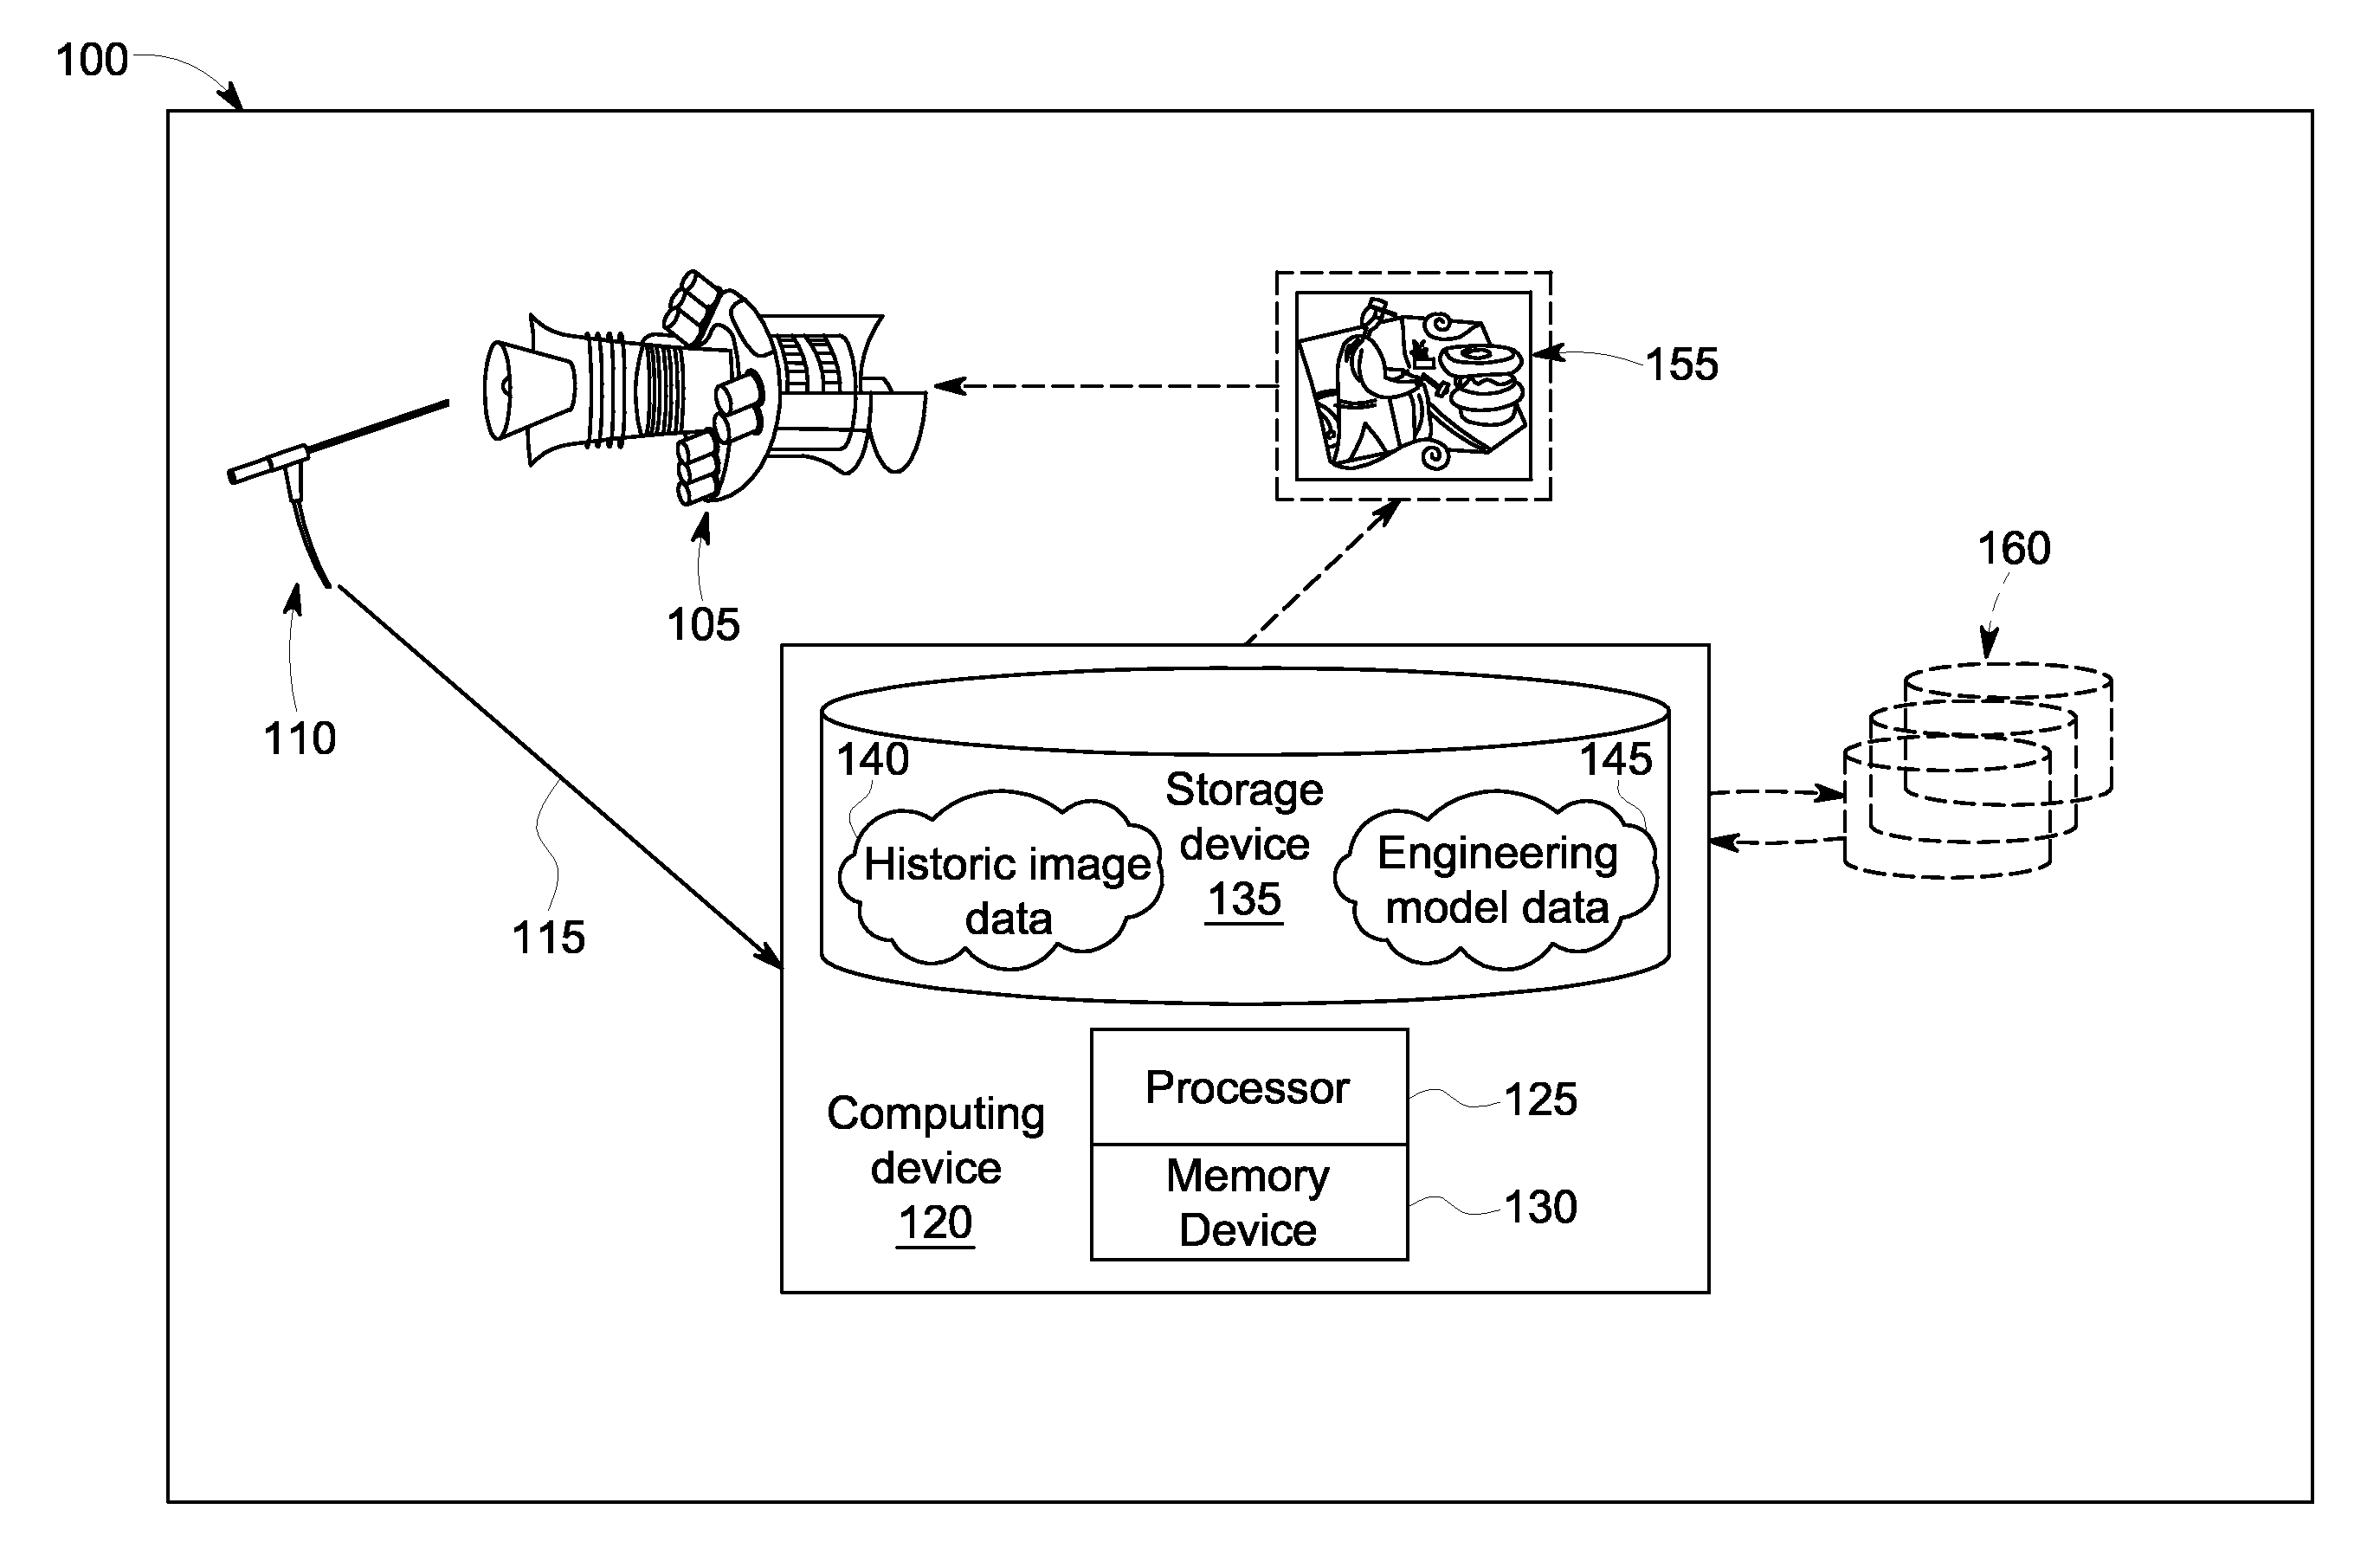 Methods and Systems for Enhanced Automated Visual Inspection of a Physical Asset